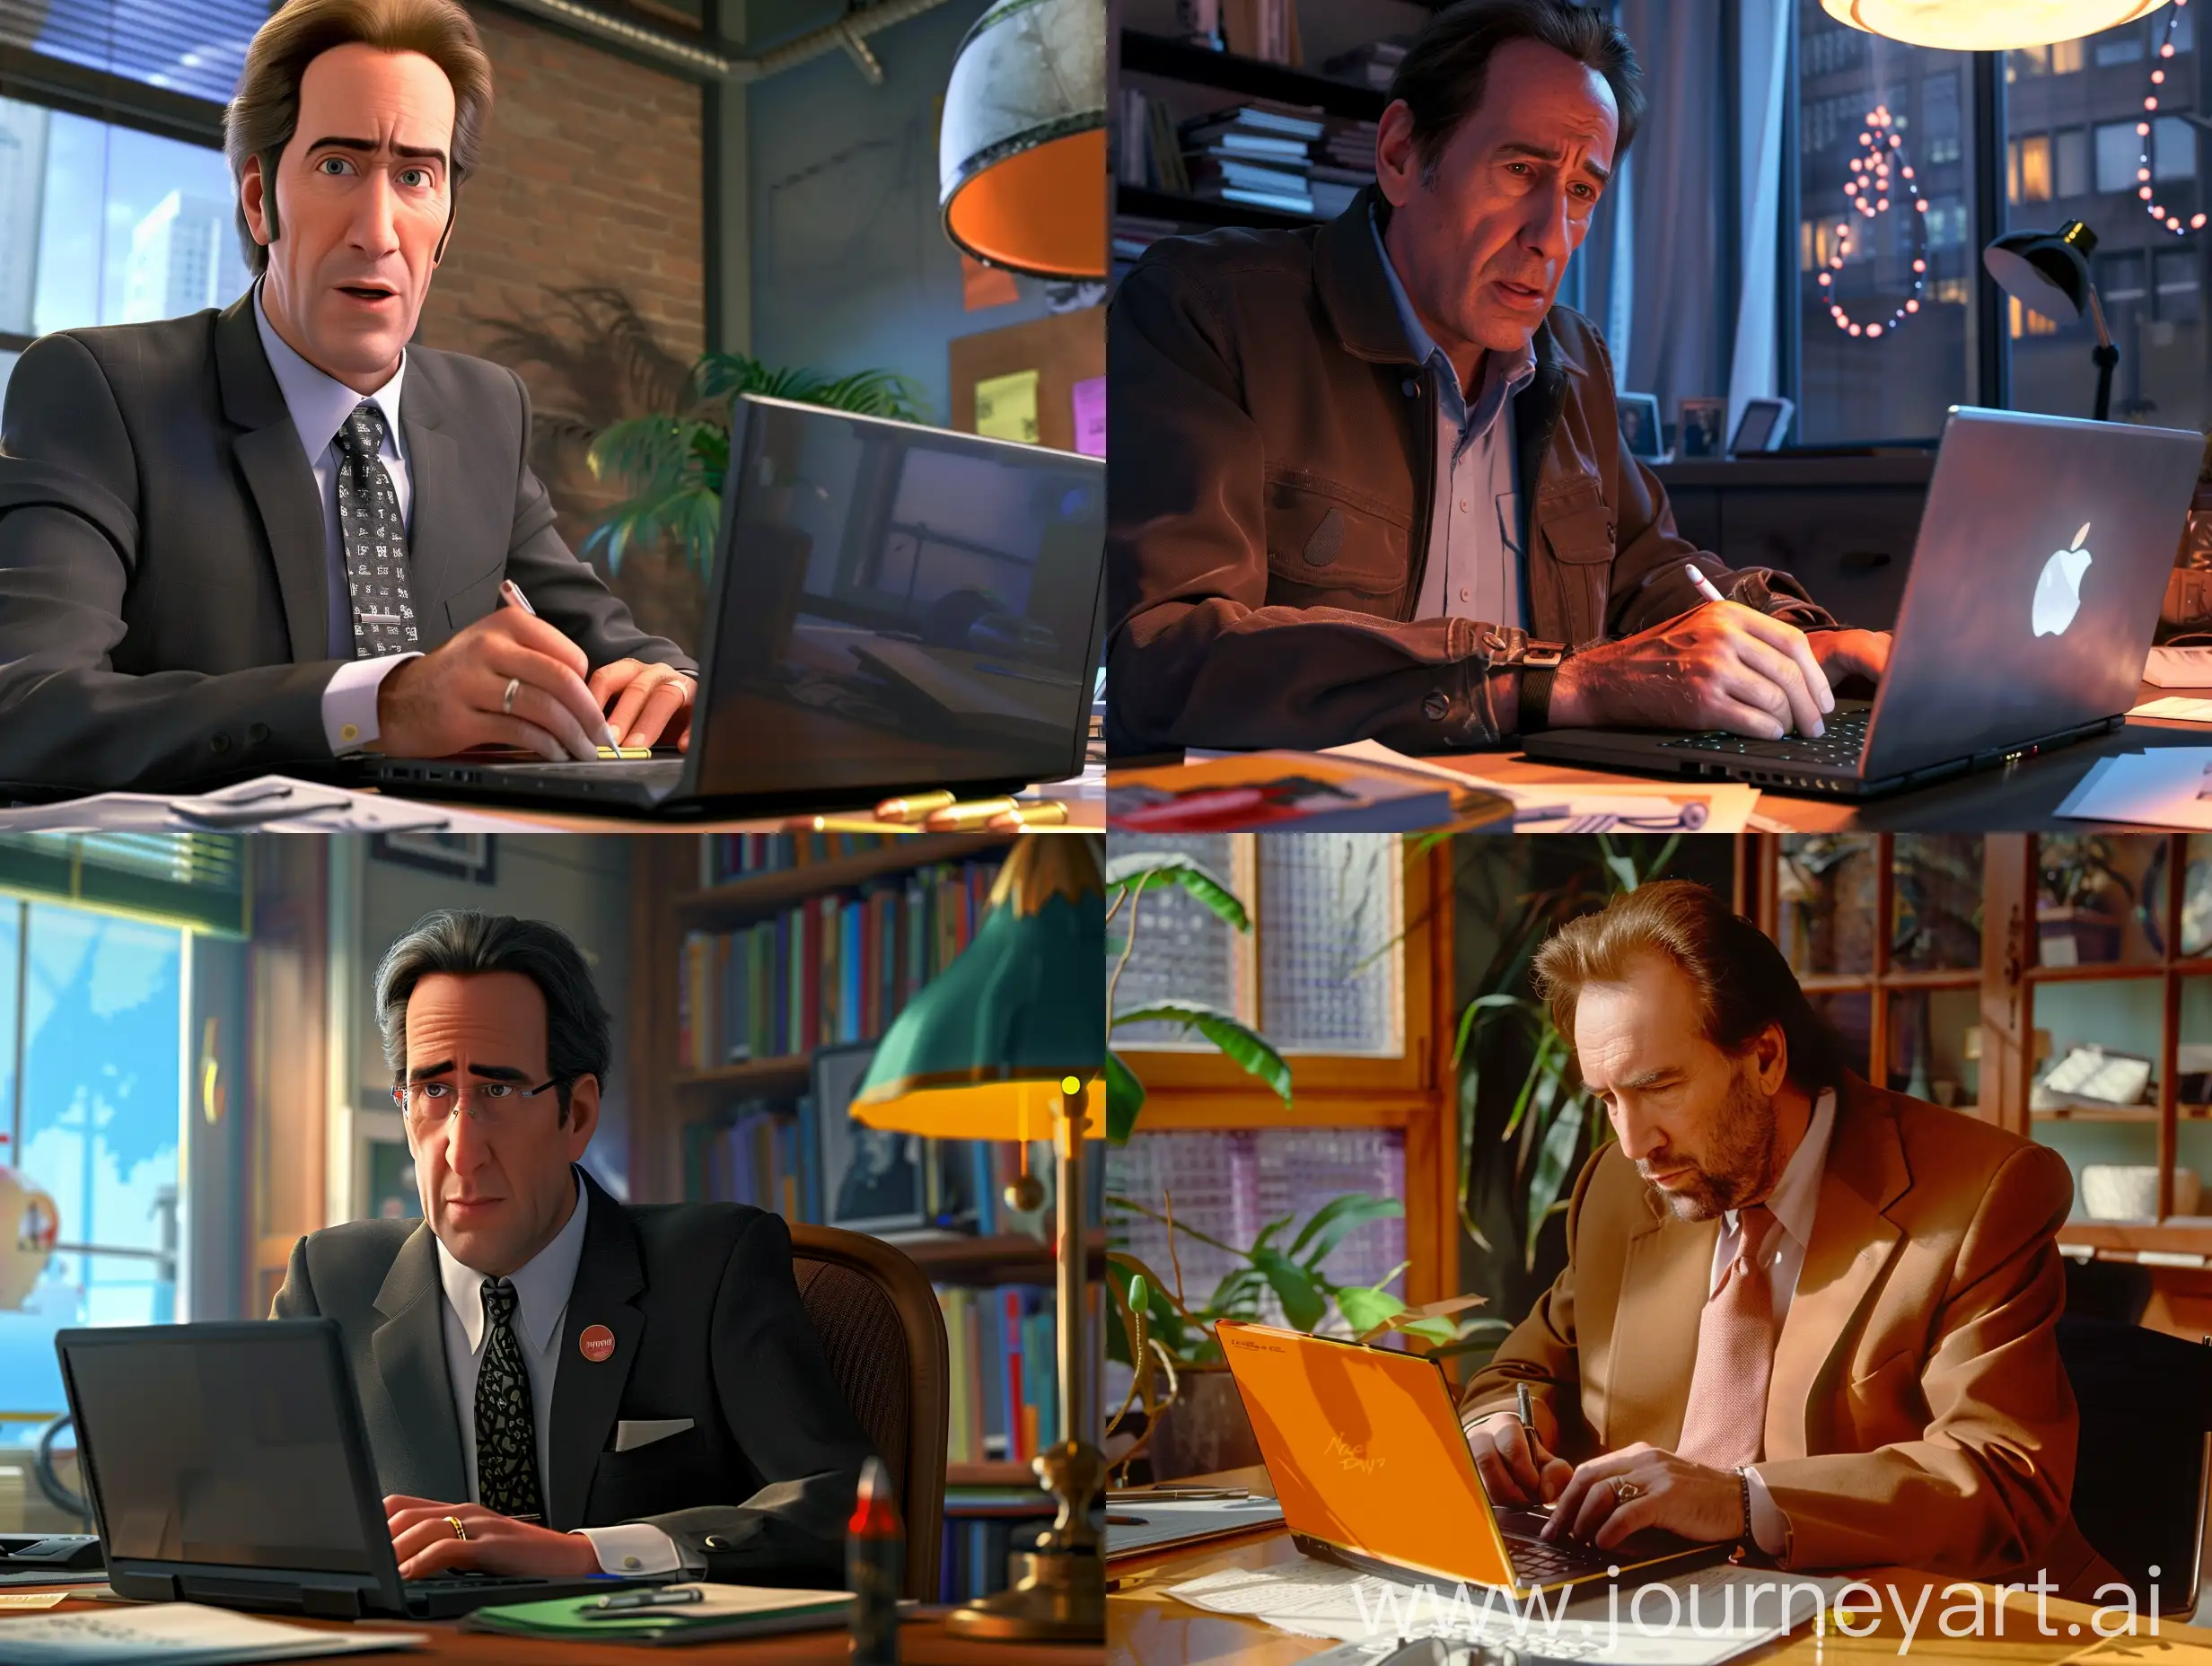 Nicolas-Cage-Writing-Messages-on-PixarStyle-Laptop-in-The-Gun-Baron-Office